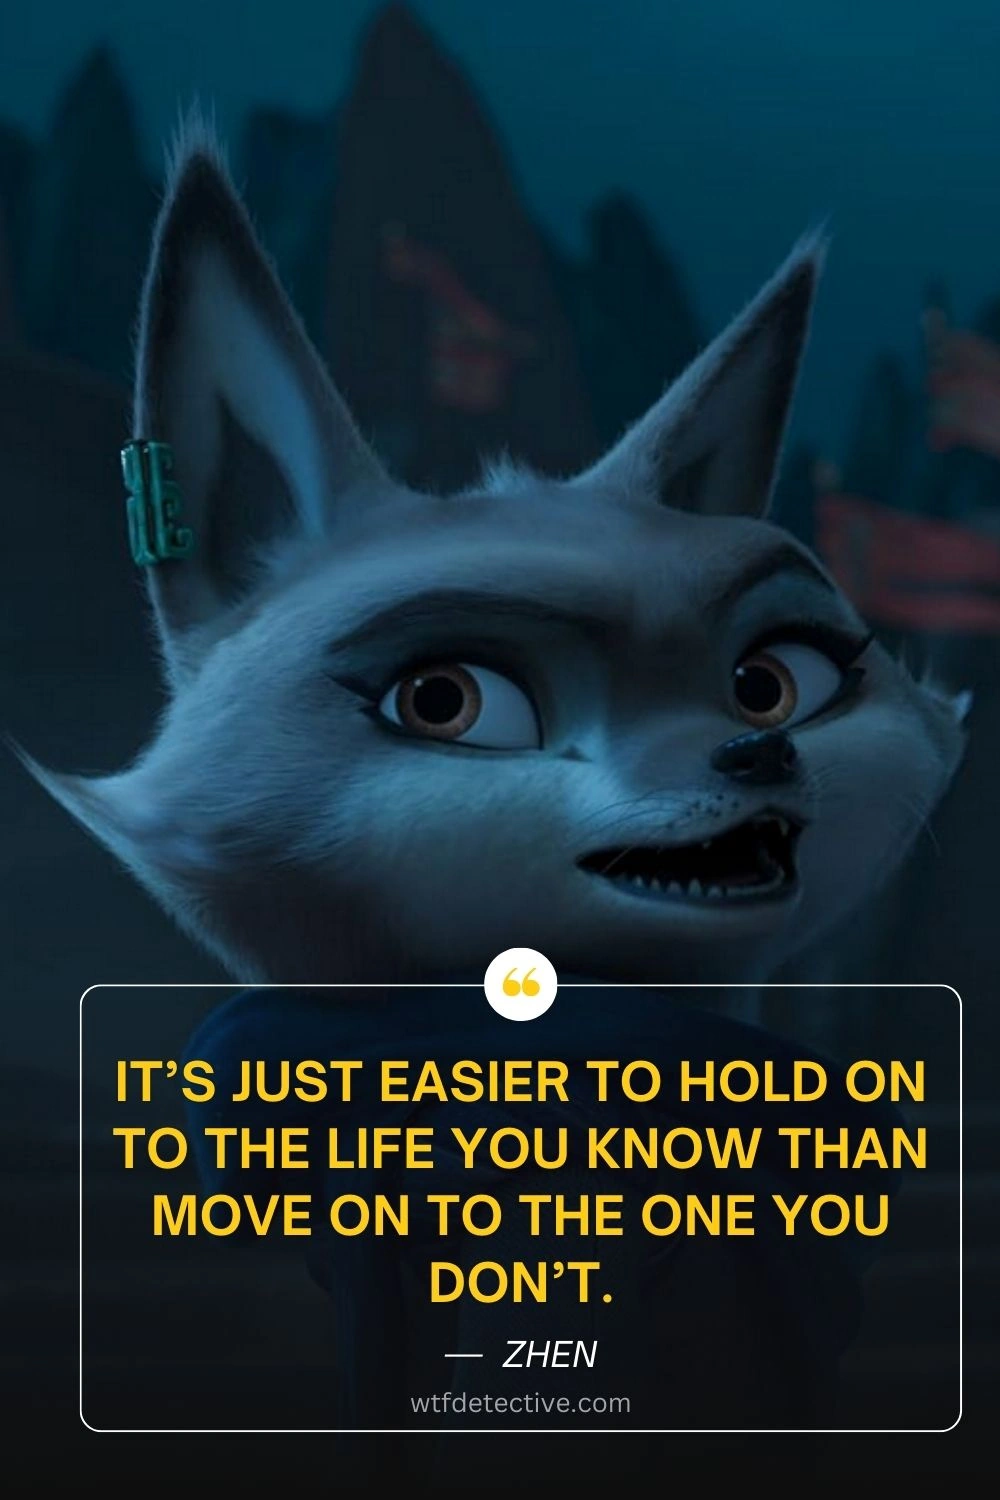 It’s just easier to hold on to the life you know than move on to the one you don’t., zhen quotes from kung fu panda 4 2024 movie